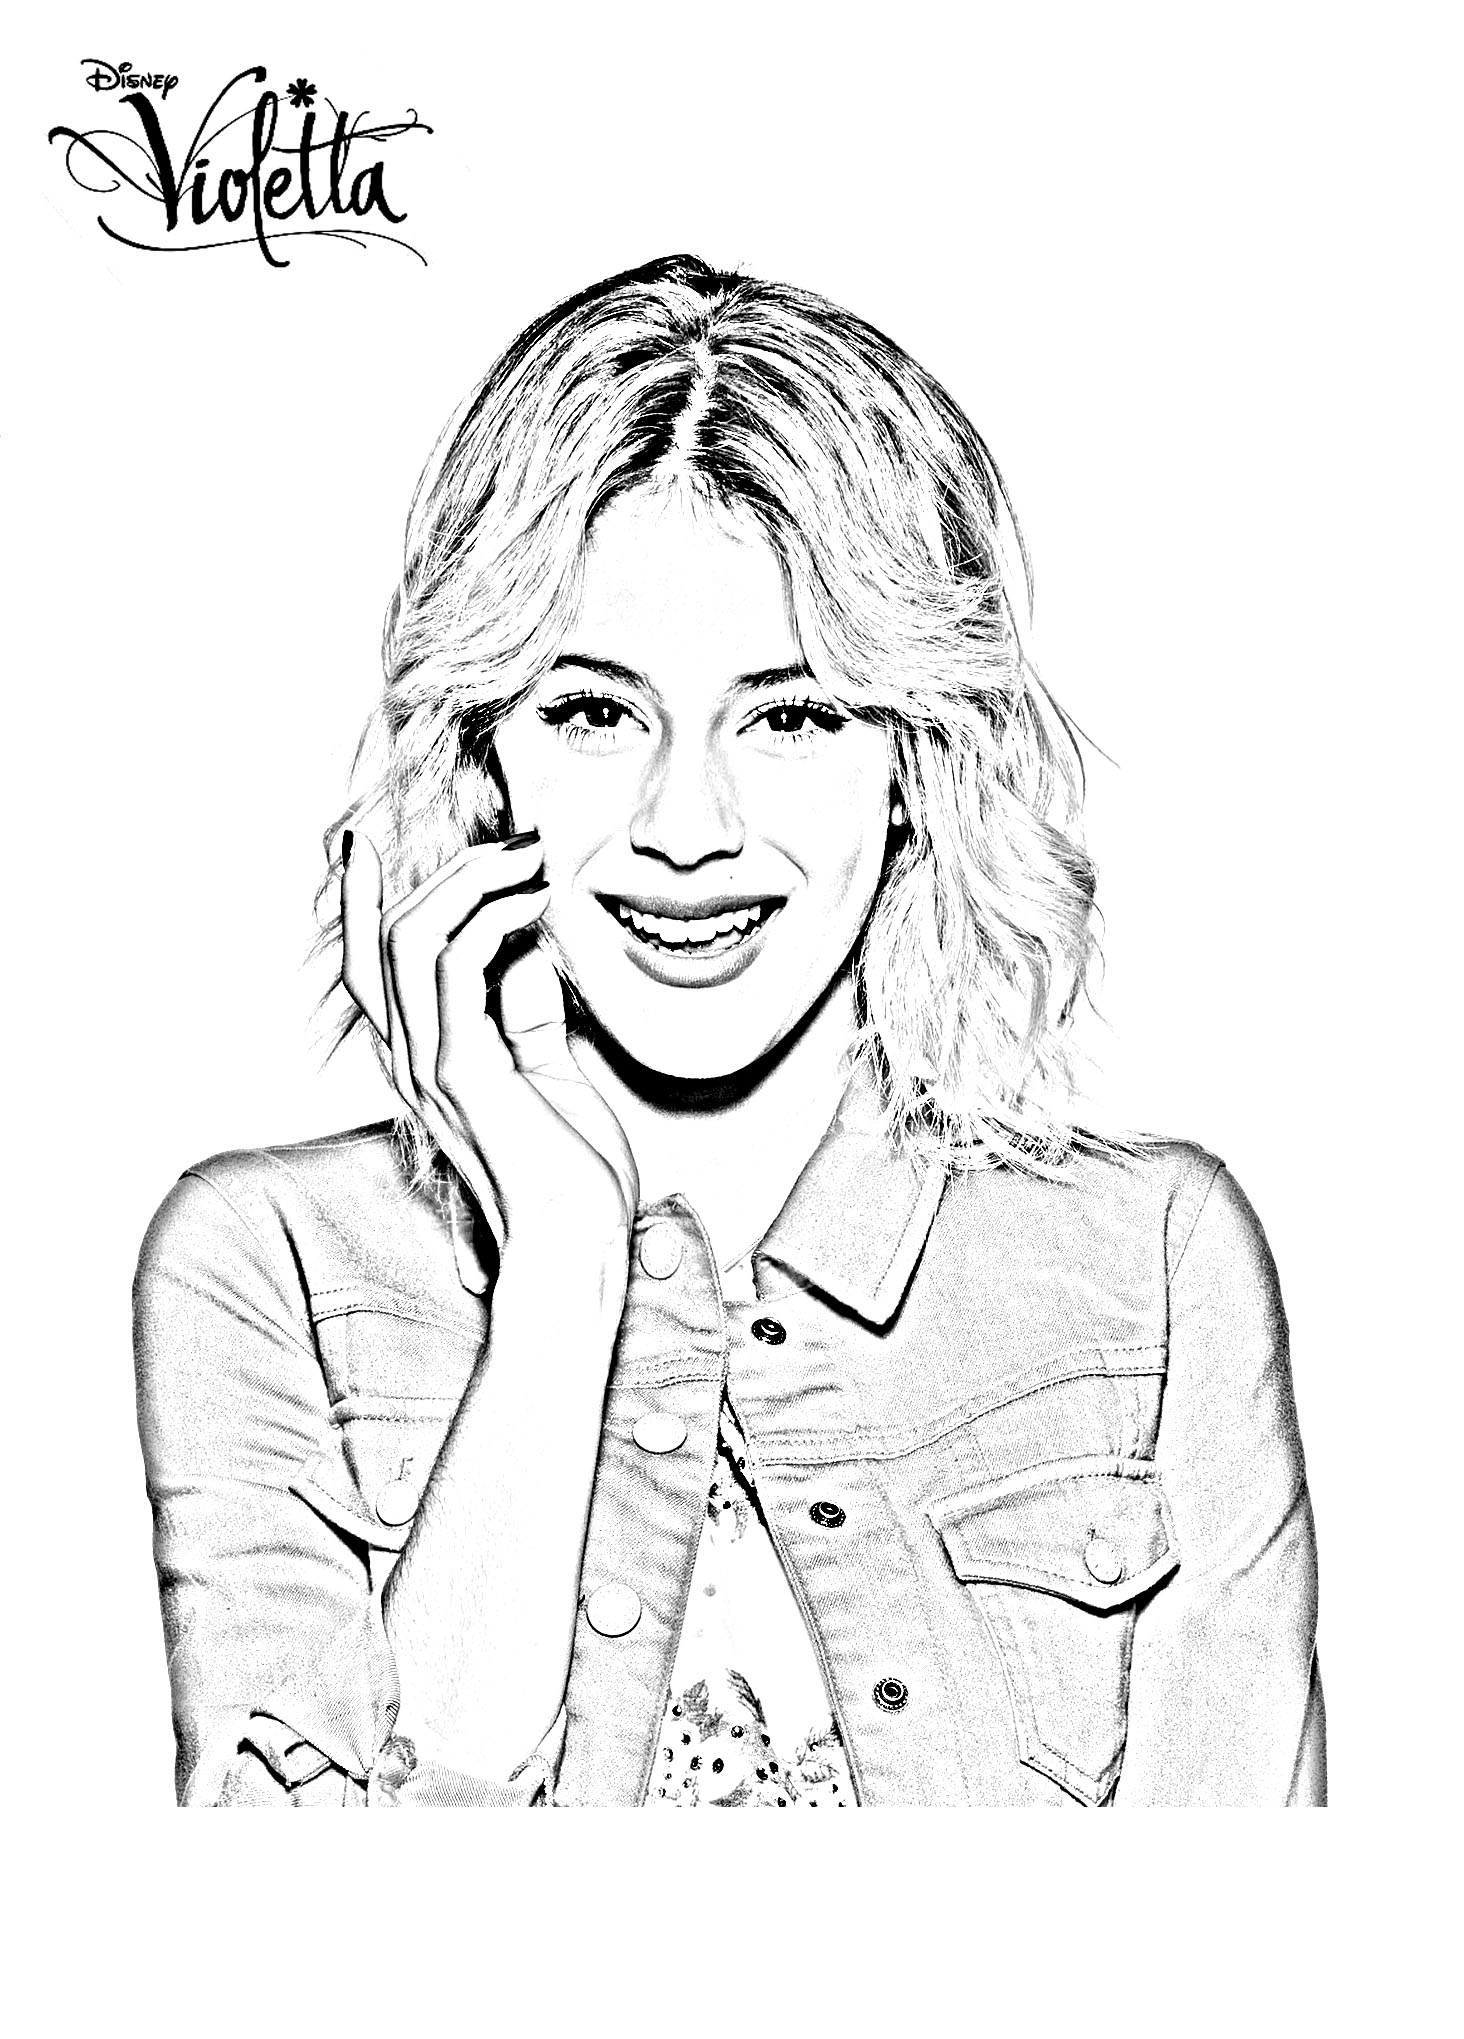 The new Violetta of the season 3 ! Always more beautiful ...